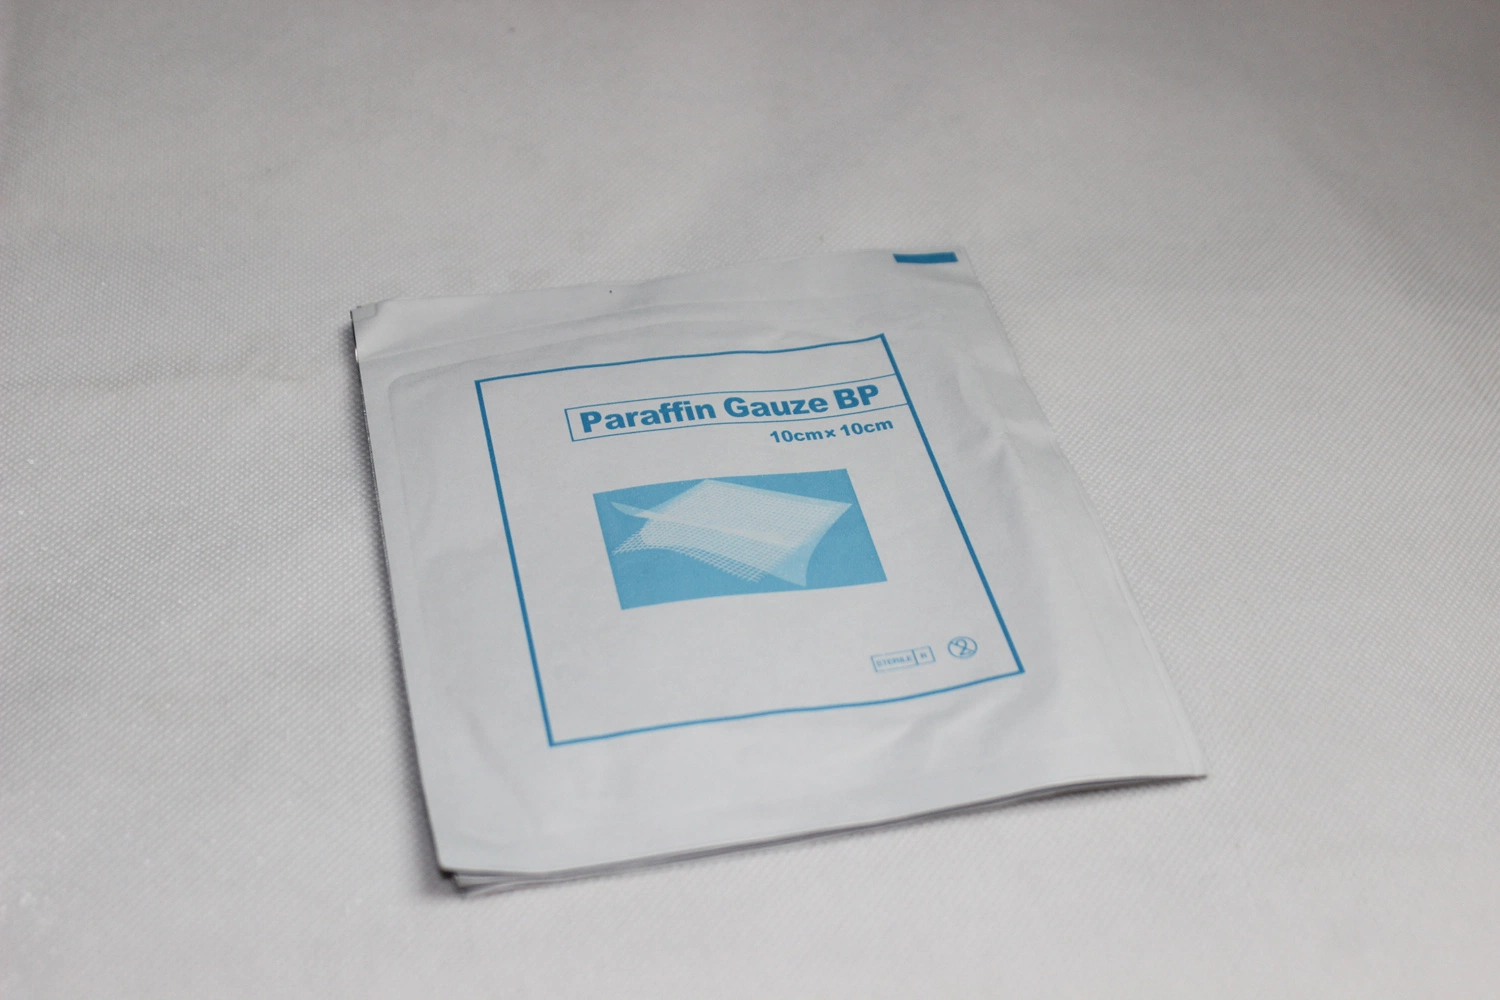 Sterile Paraffin Gauze Disposable Wound Medical Products